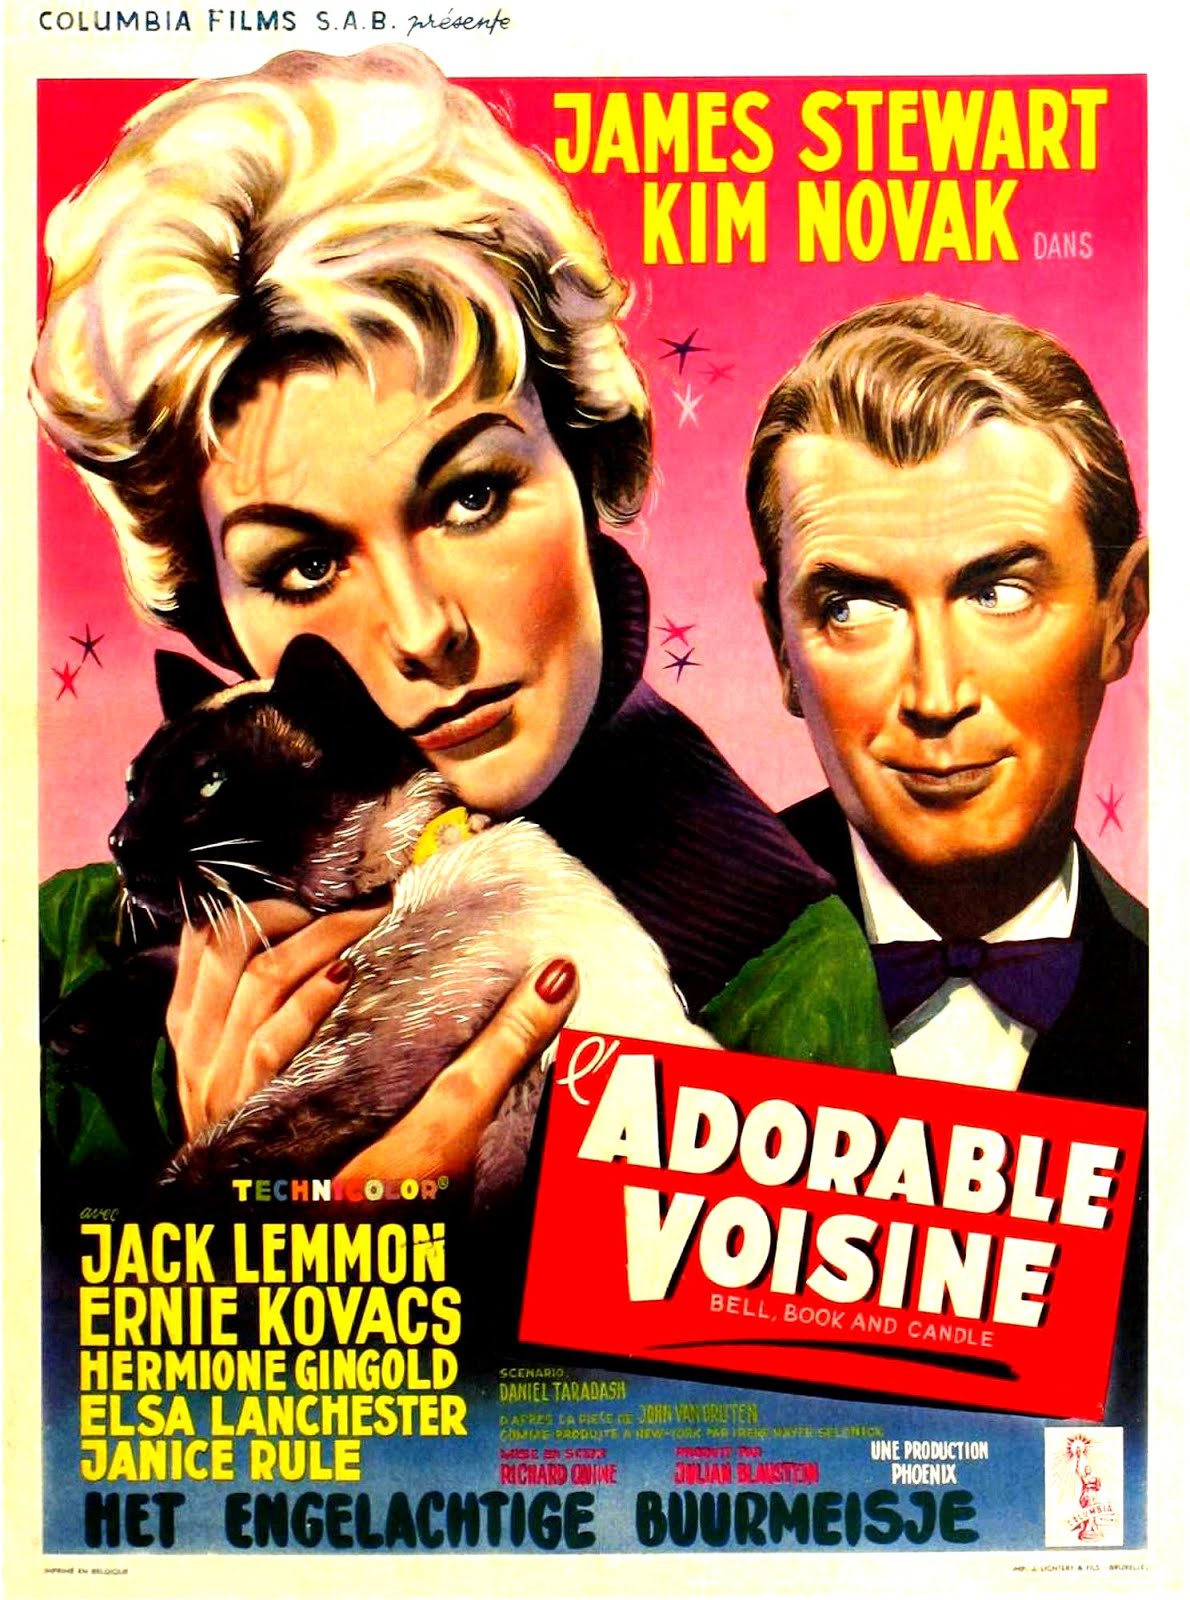 L'adorable voisine (1958) Richard Quine - Bell , book and candle (03.02.1958 / 07.04.1958)